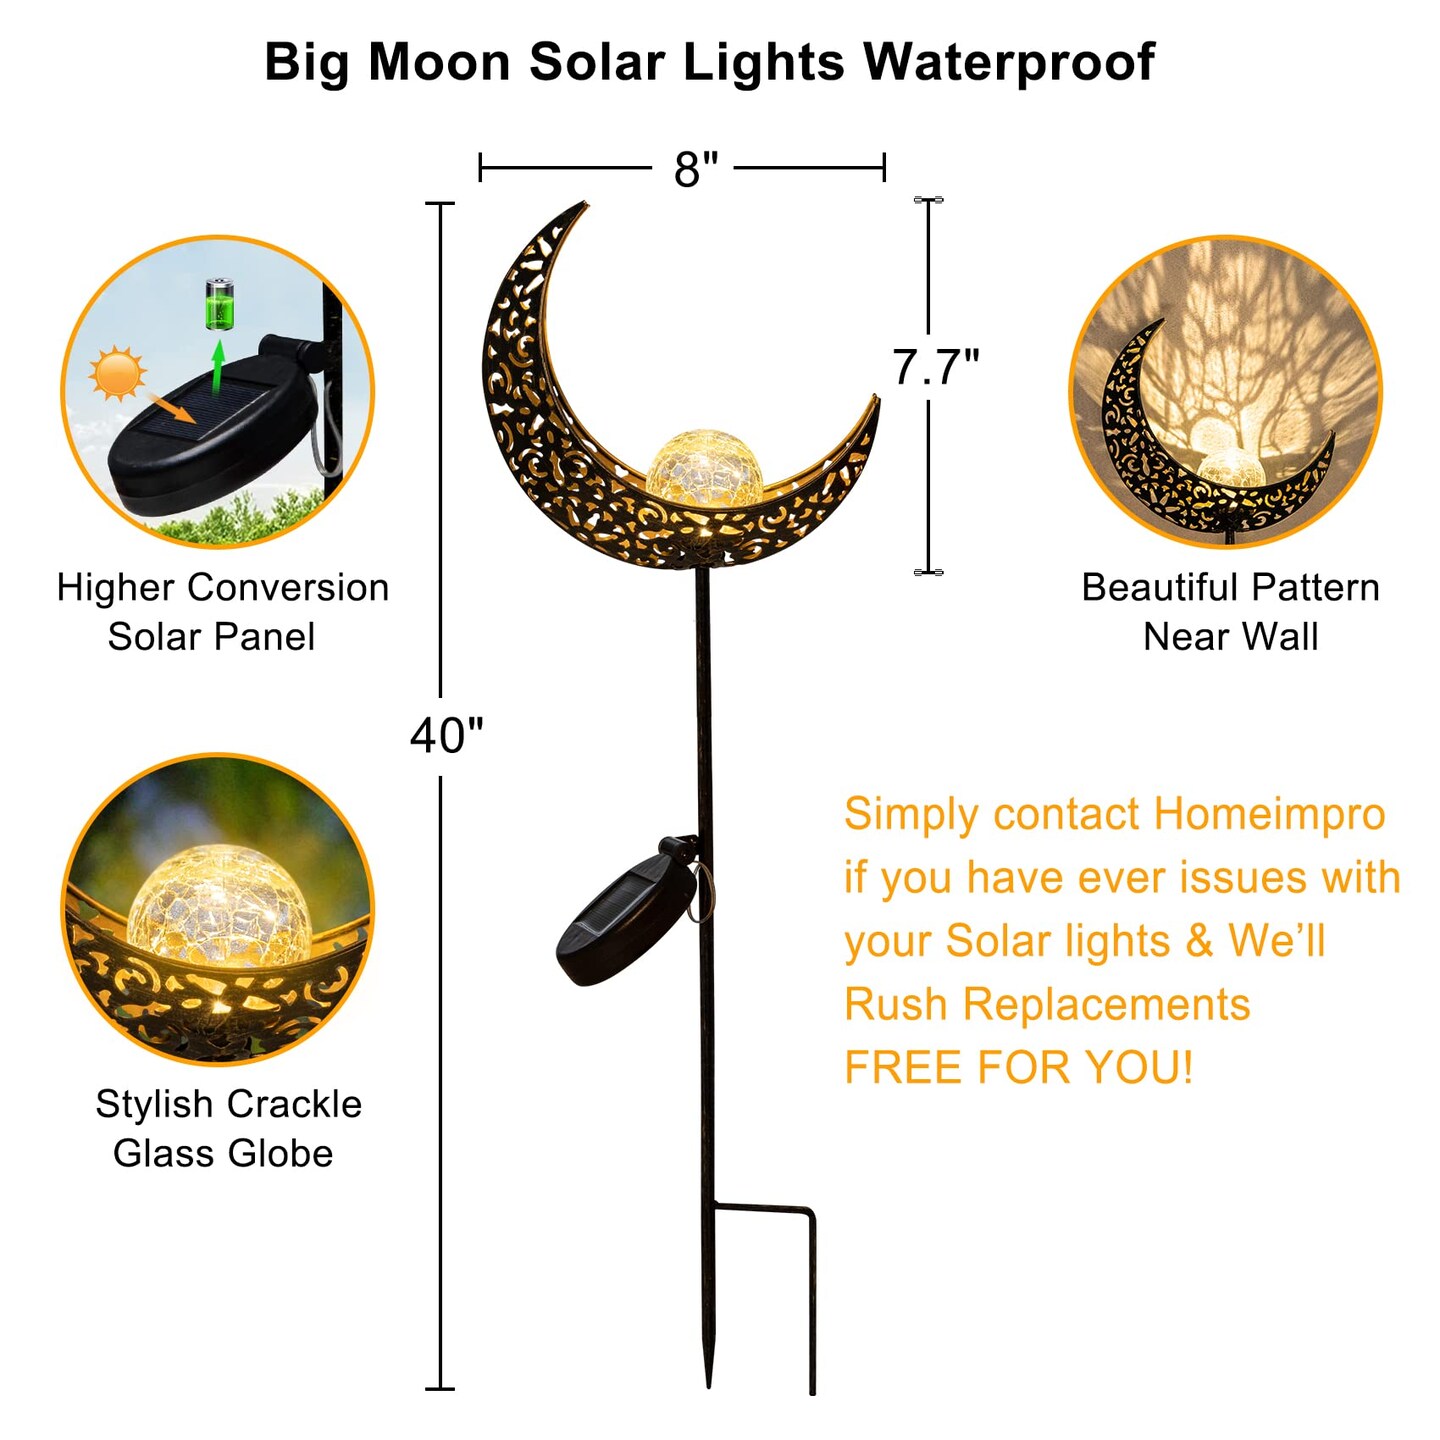 HOMEIMPRO Moon Solar Garden Lights Outdoor Stakes, Waterproof Crackle Glass Metal Decorative Lights for Lawn, Patio Accessories, Yard Decor, Christmas Gift (Bronze)